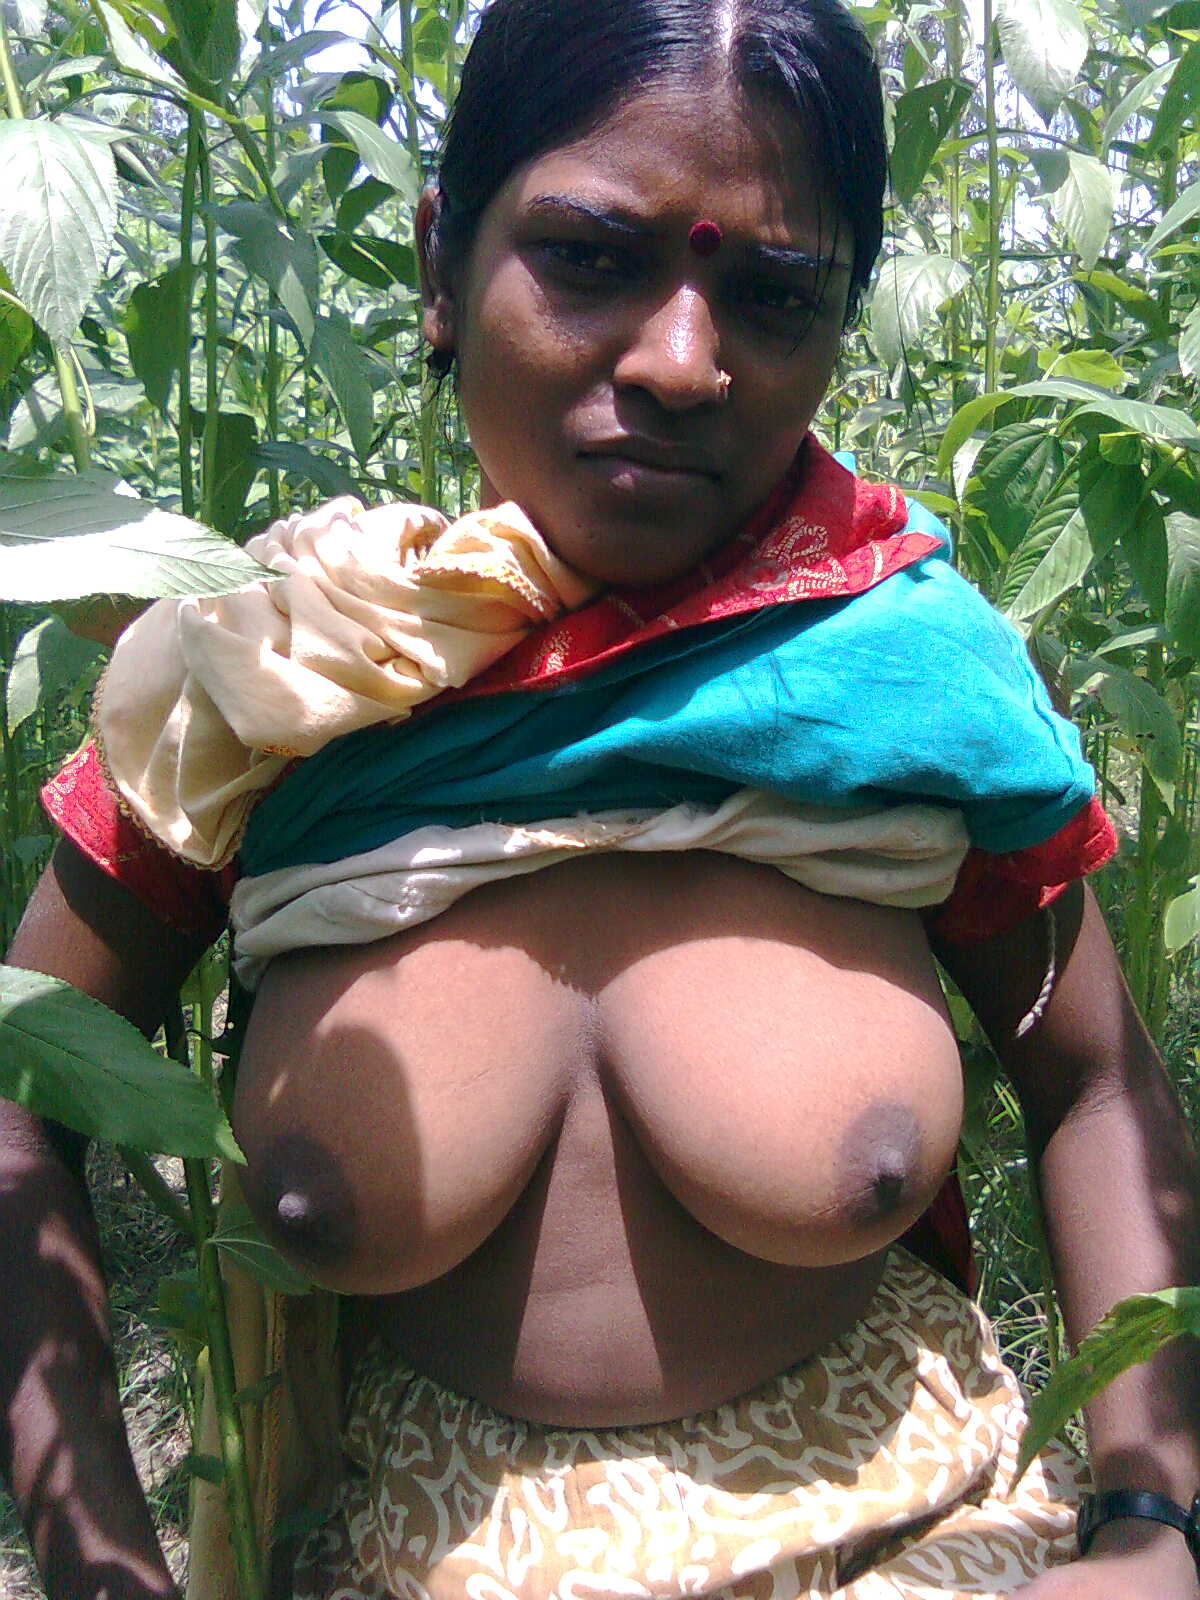 Tamil Girls Nude Pictures.